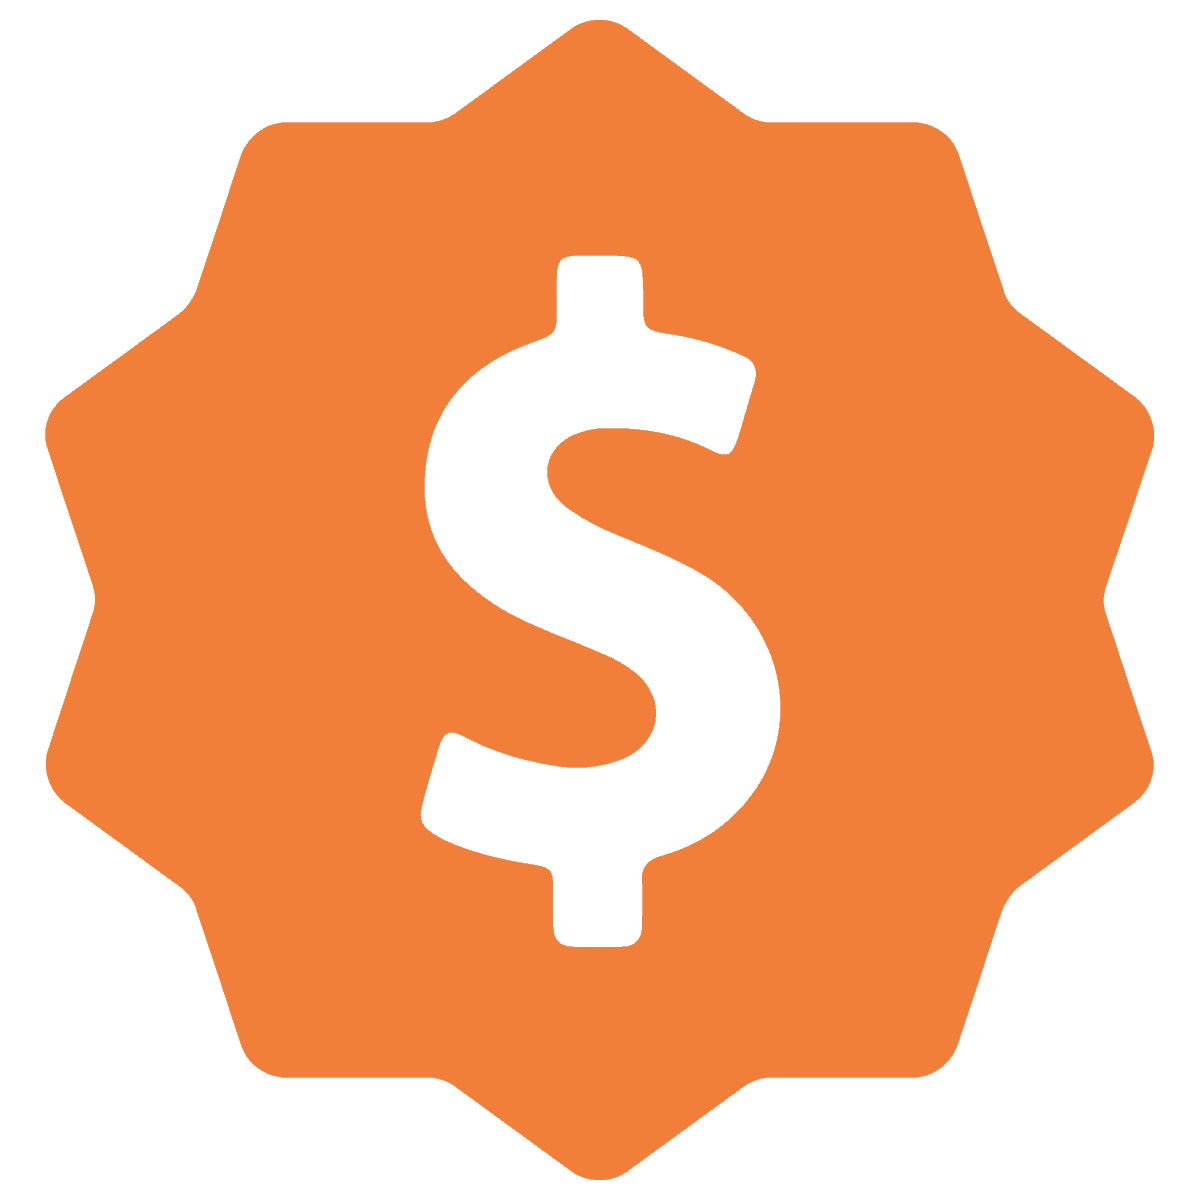 icon showing money or price with a dollar sign